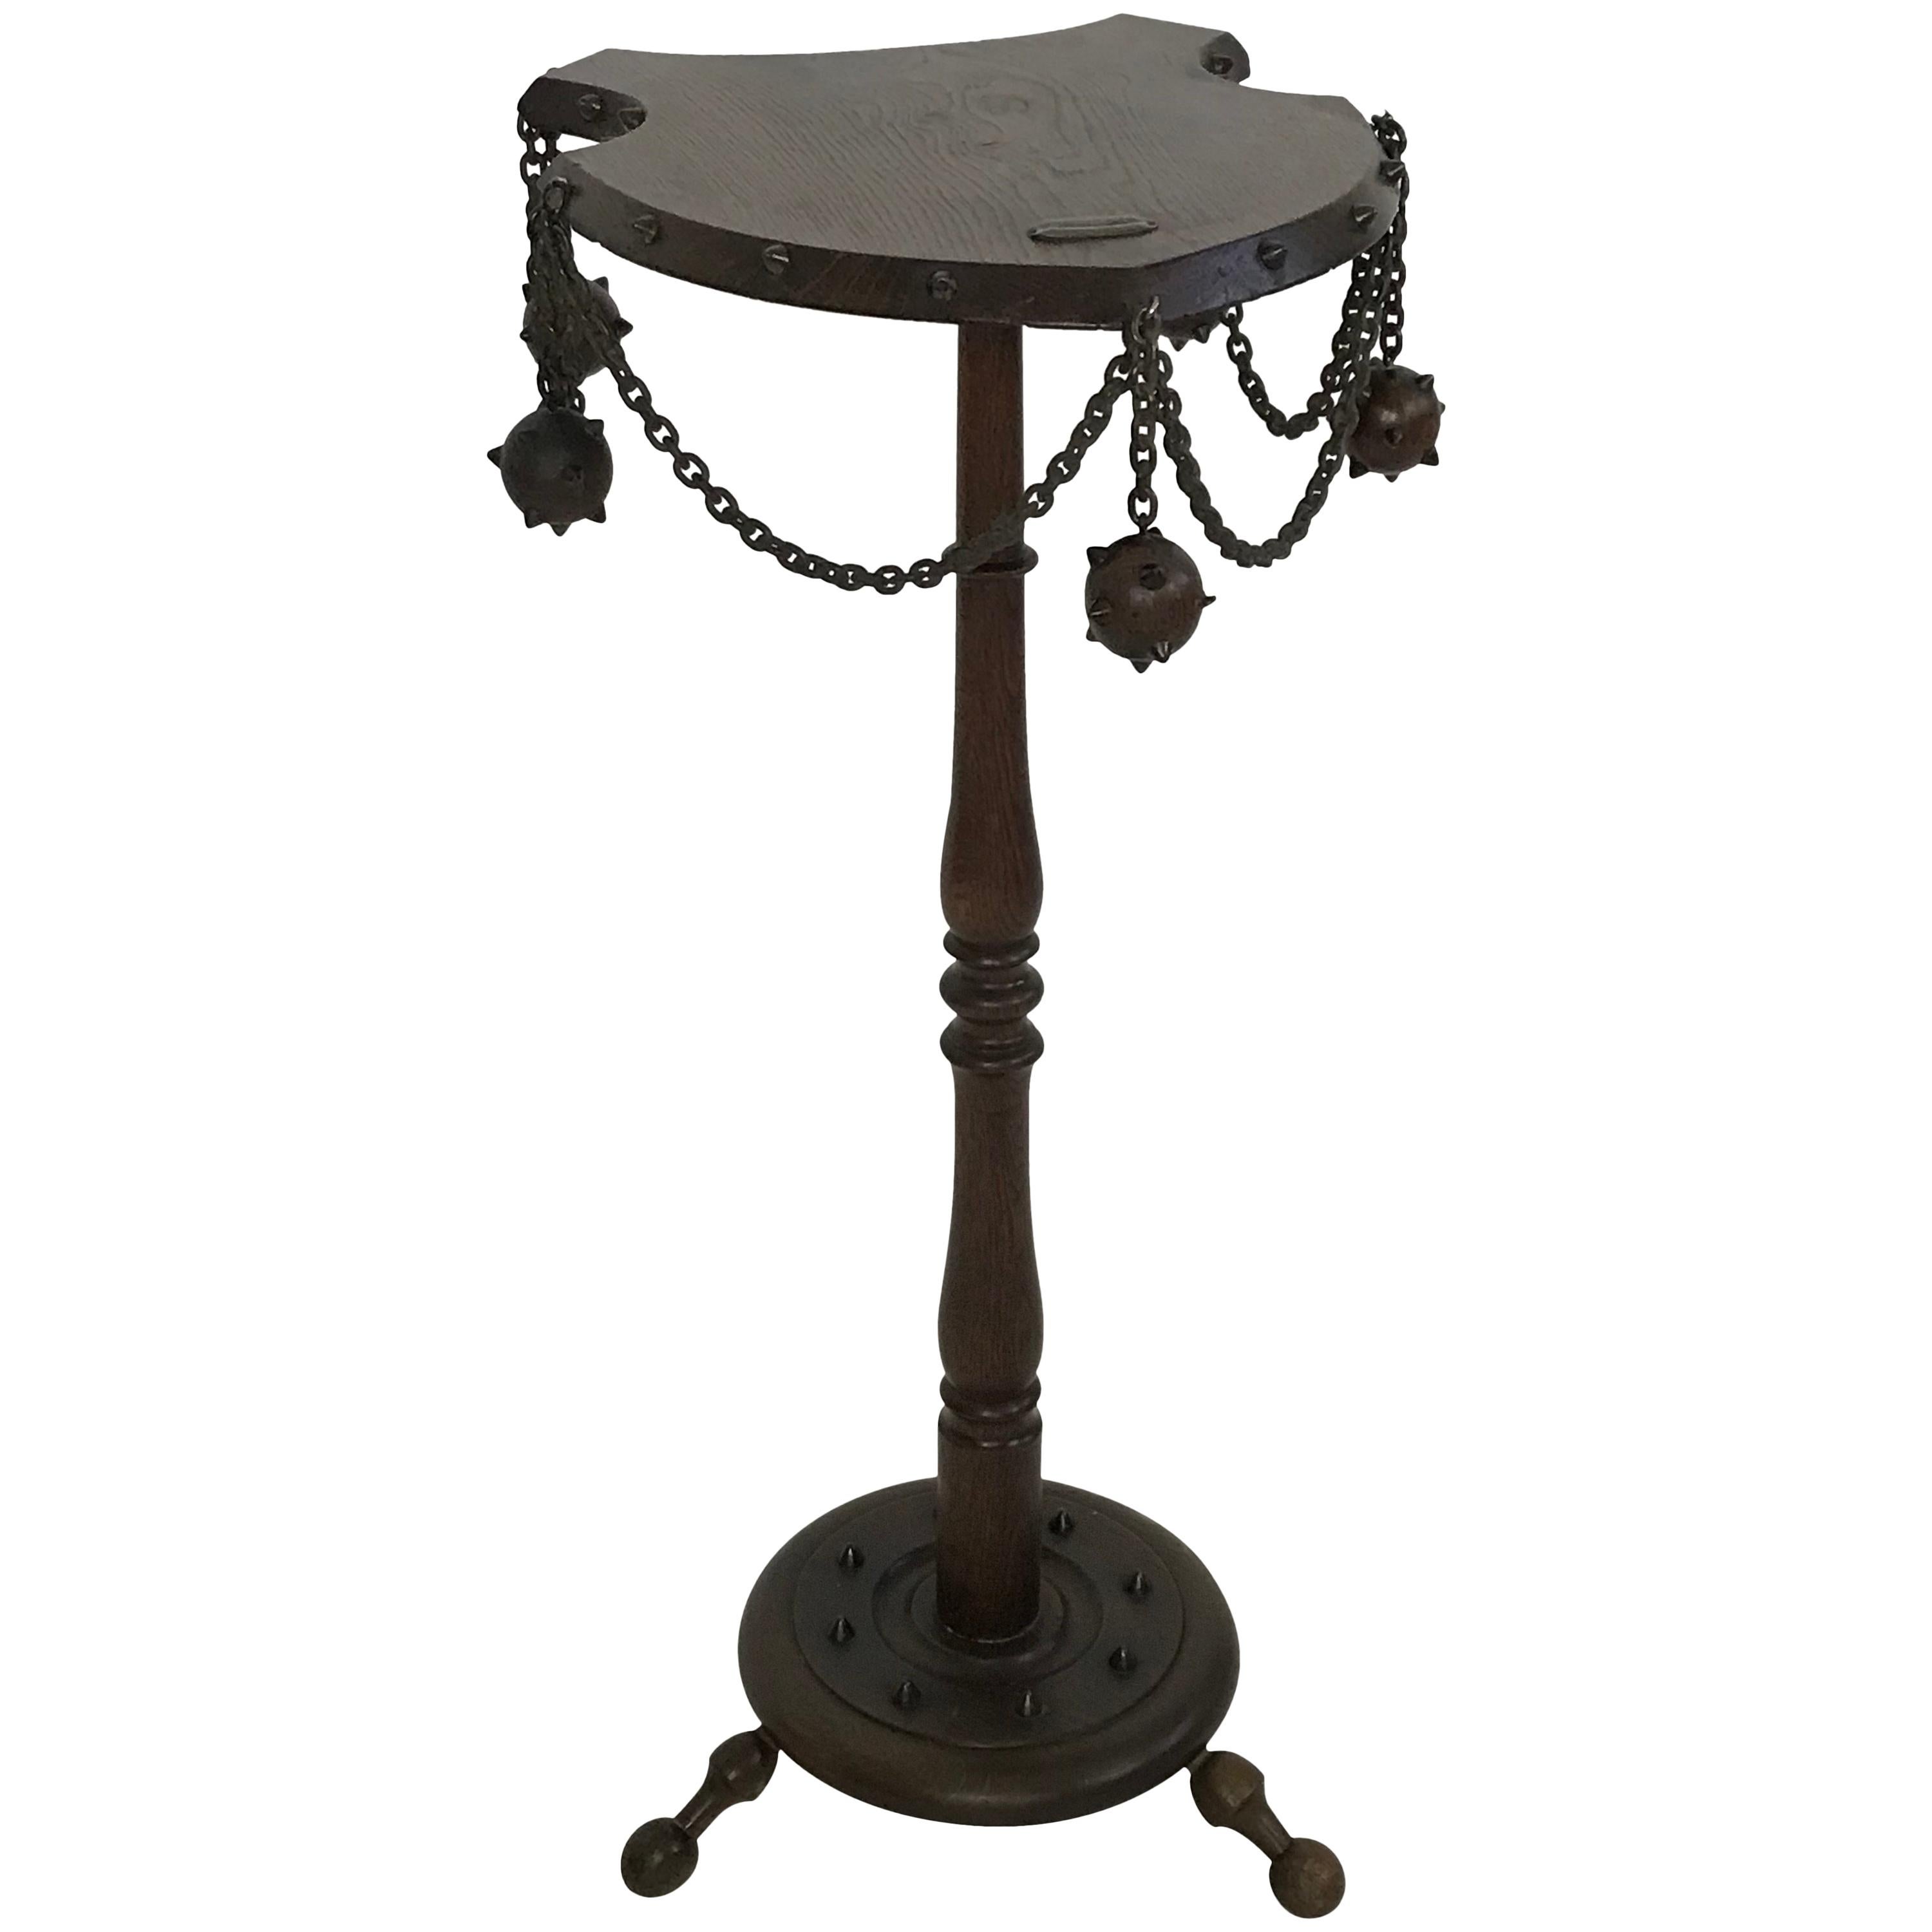 Medieval Themed Smoking Side Table with Mace and Chain